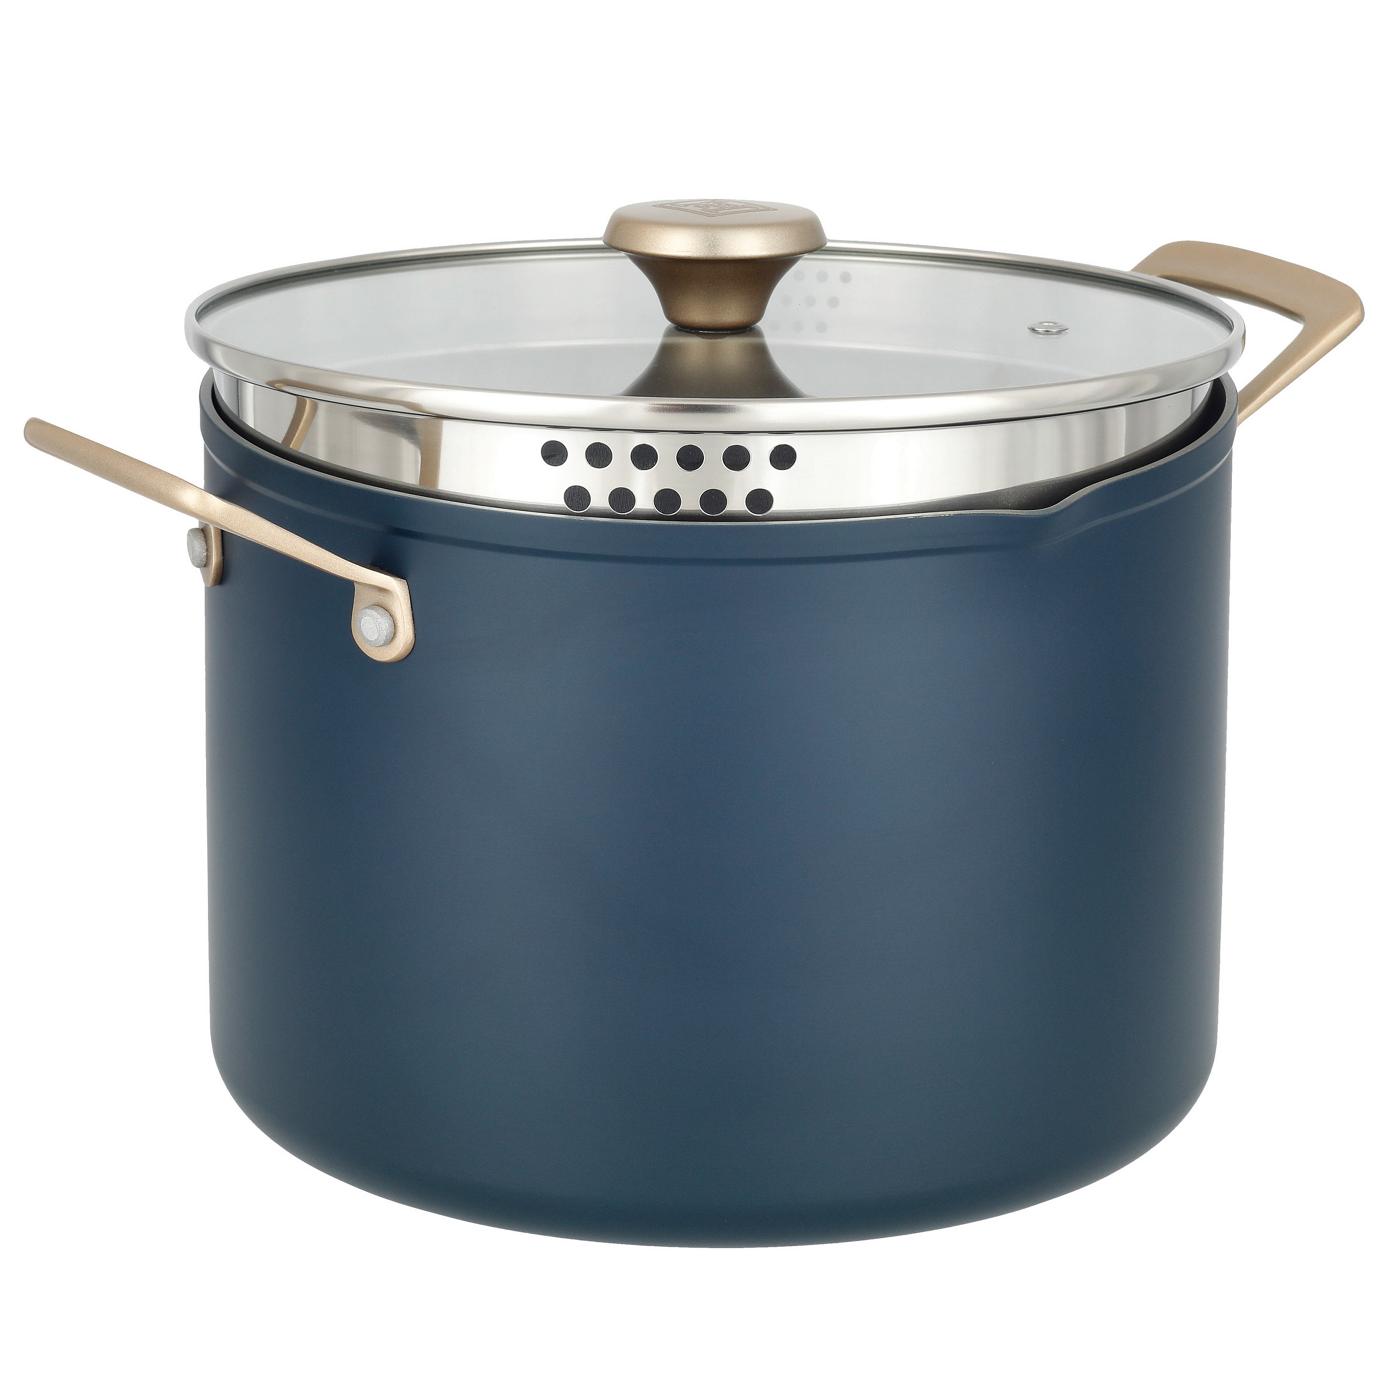 Kitchen & Table by H-E-B Non-Stick Stock Pot - Ocean Blue; image 1 of 5